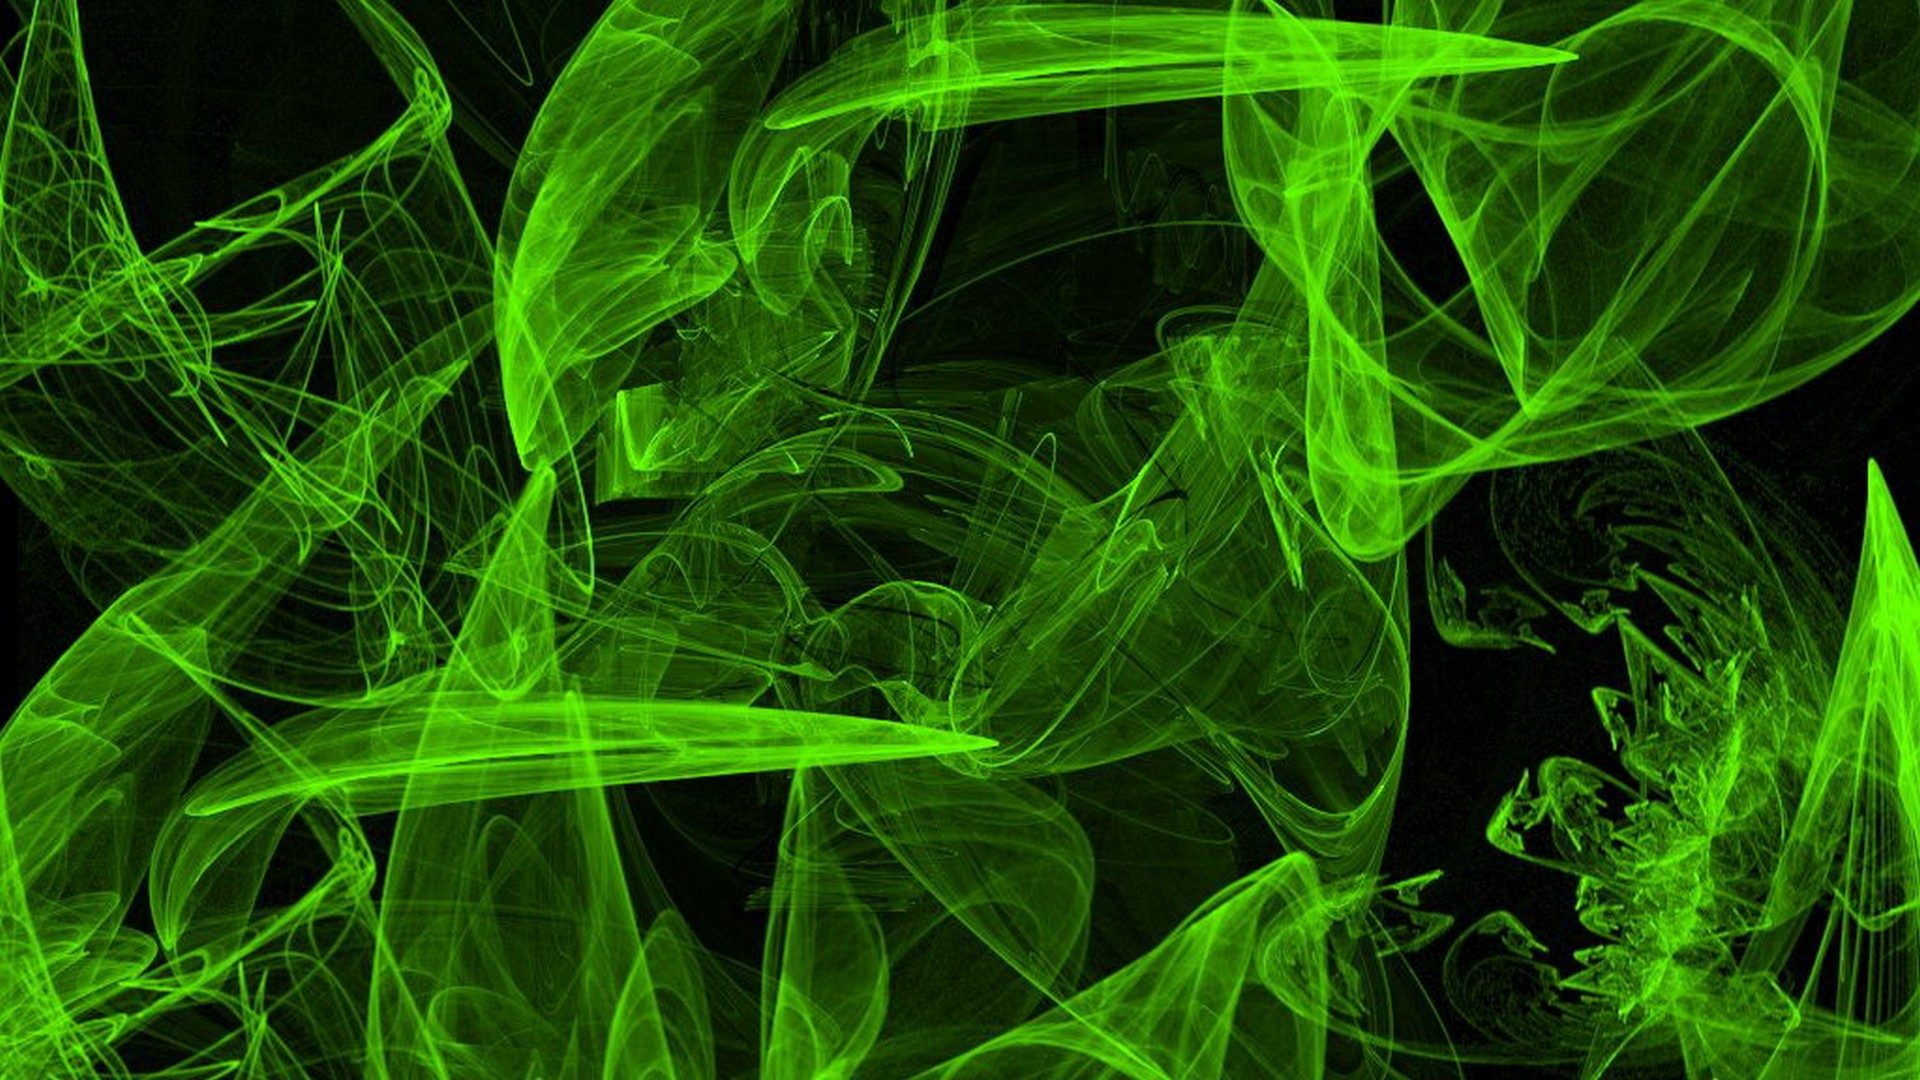 Neon Green Background Wallpaper HD with image resolution 1920x1080 pixel. You can make this wallpaper for your Desktop Computer Backgrounds, Mac Wallpapers, Android Lock screen or iPhone Screensavers